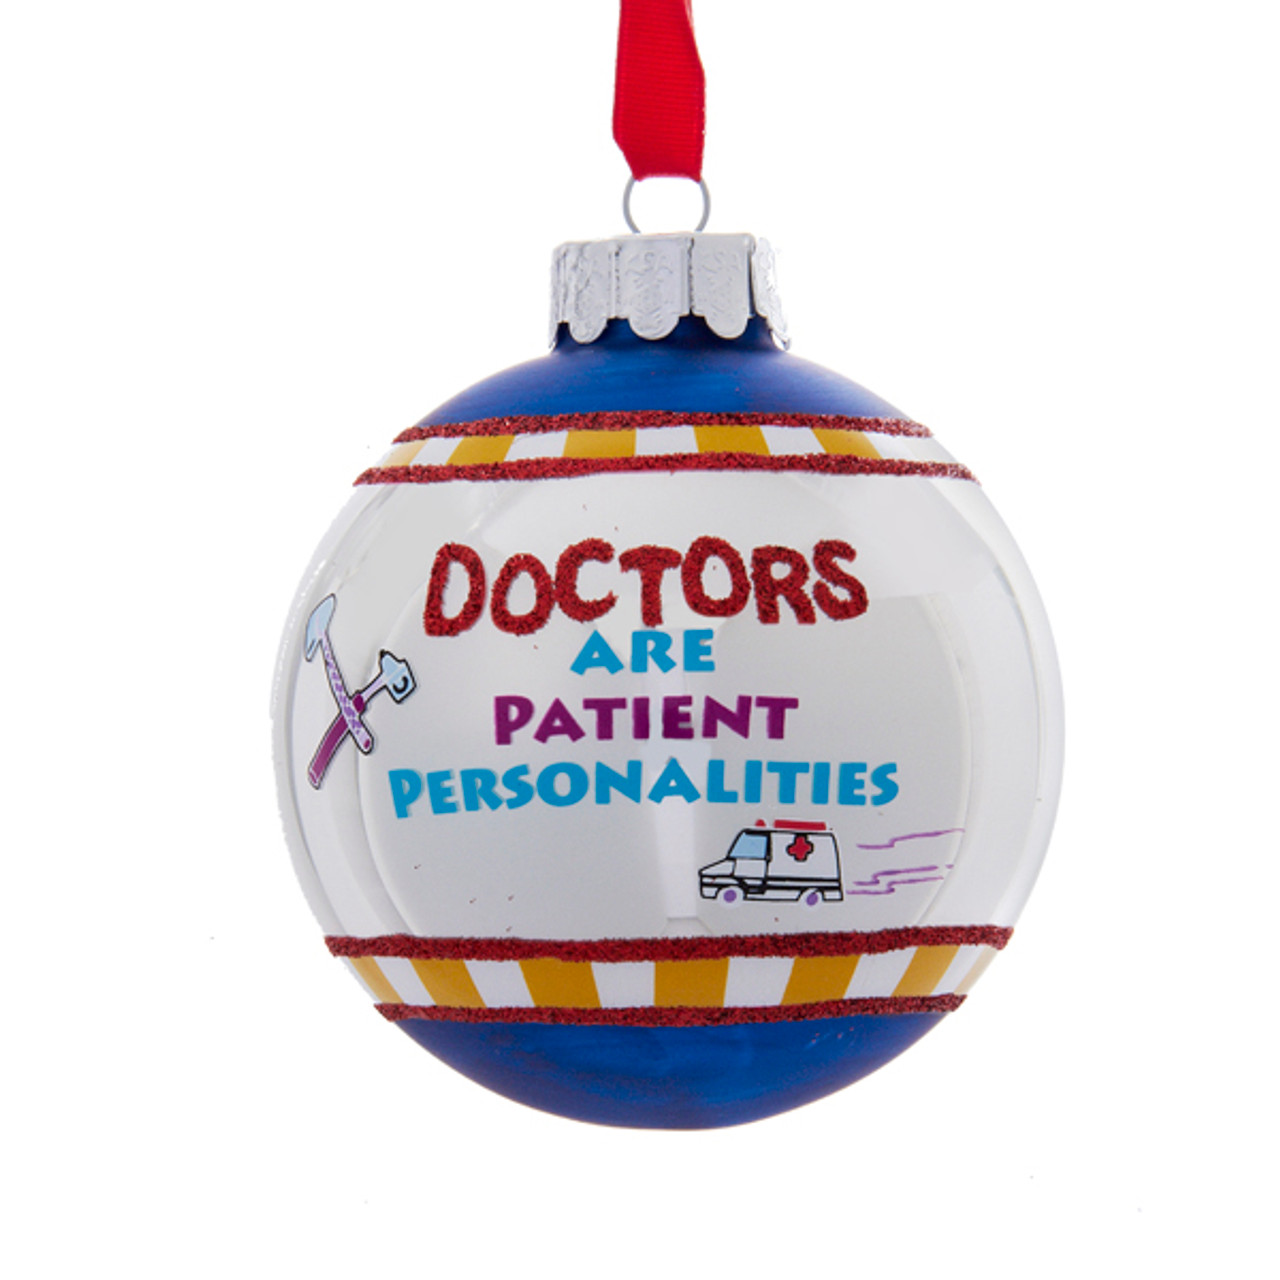 White & Blue Doctors Are Patientalities Glittered Christmas Ball